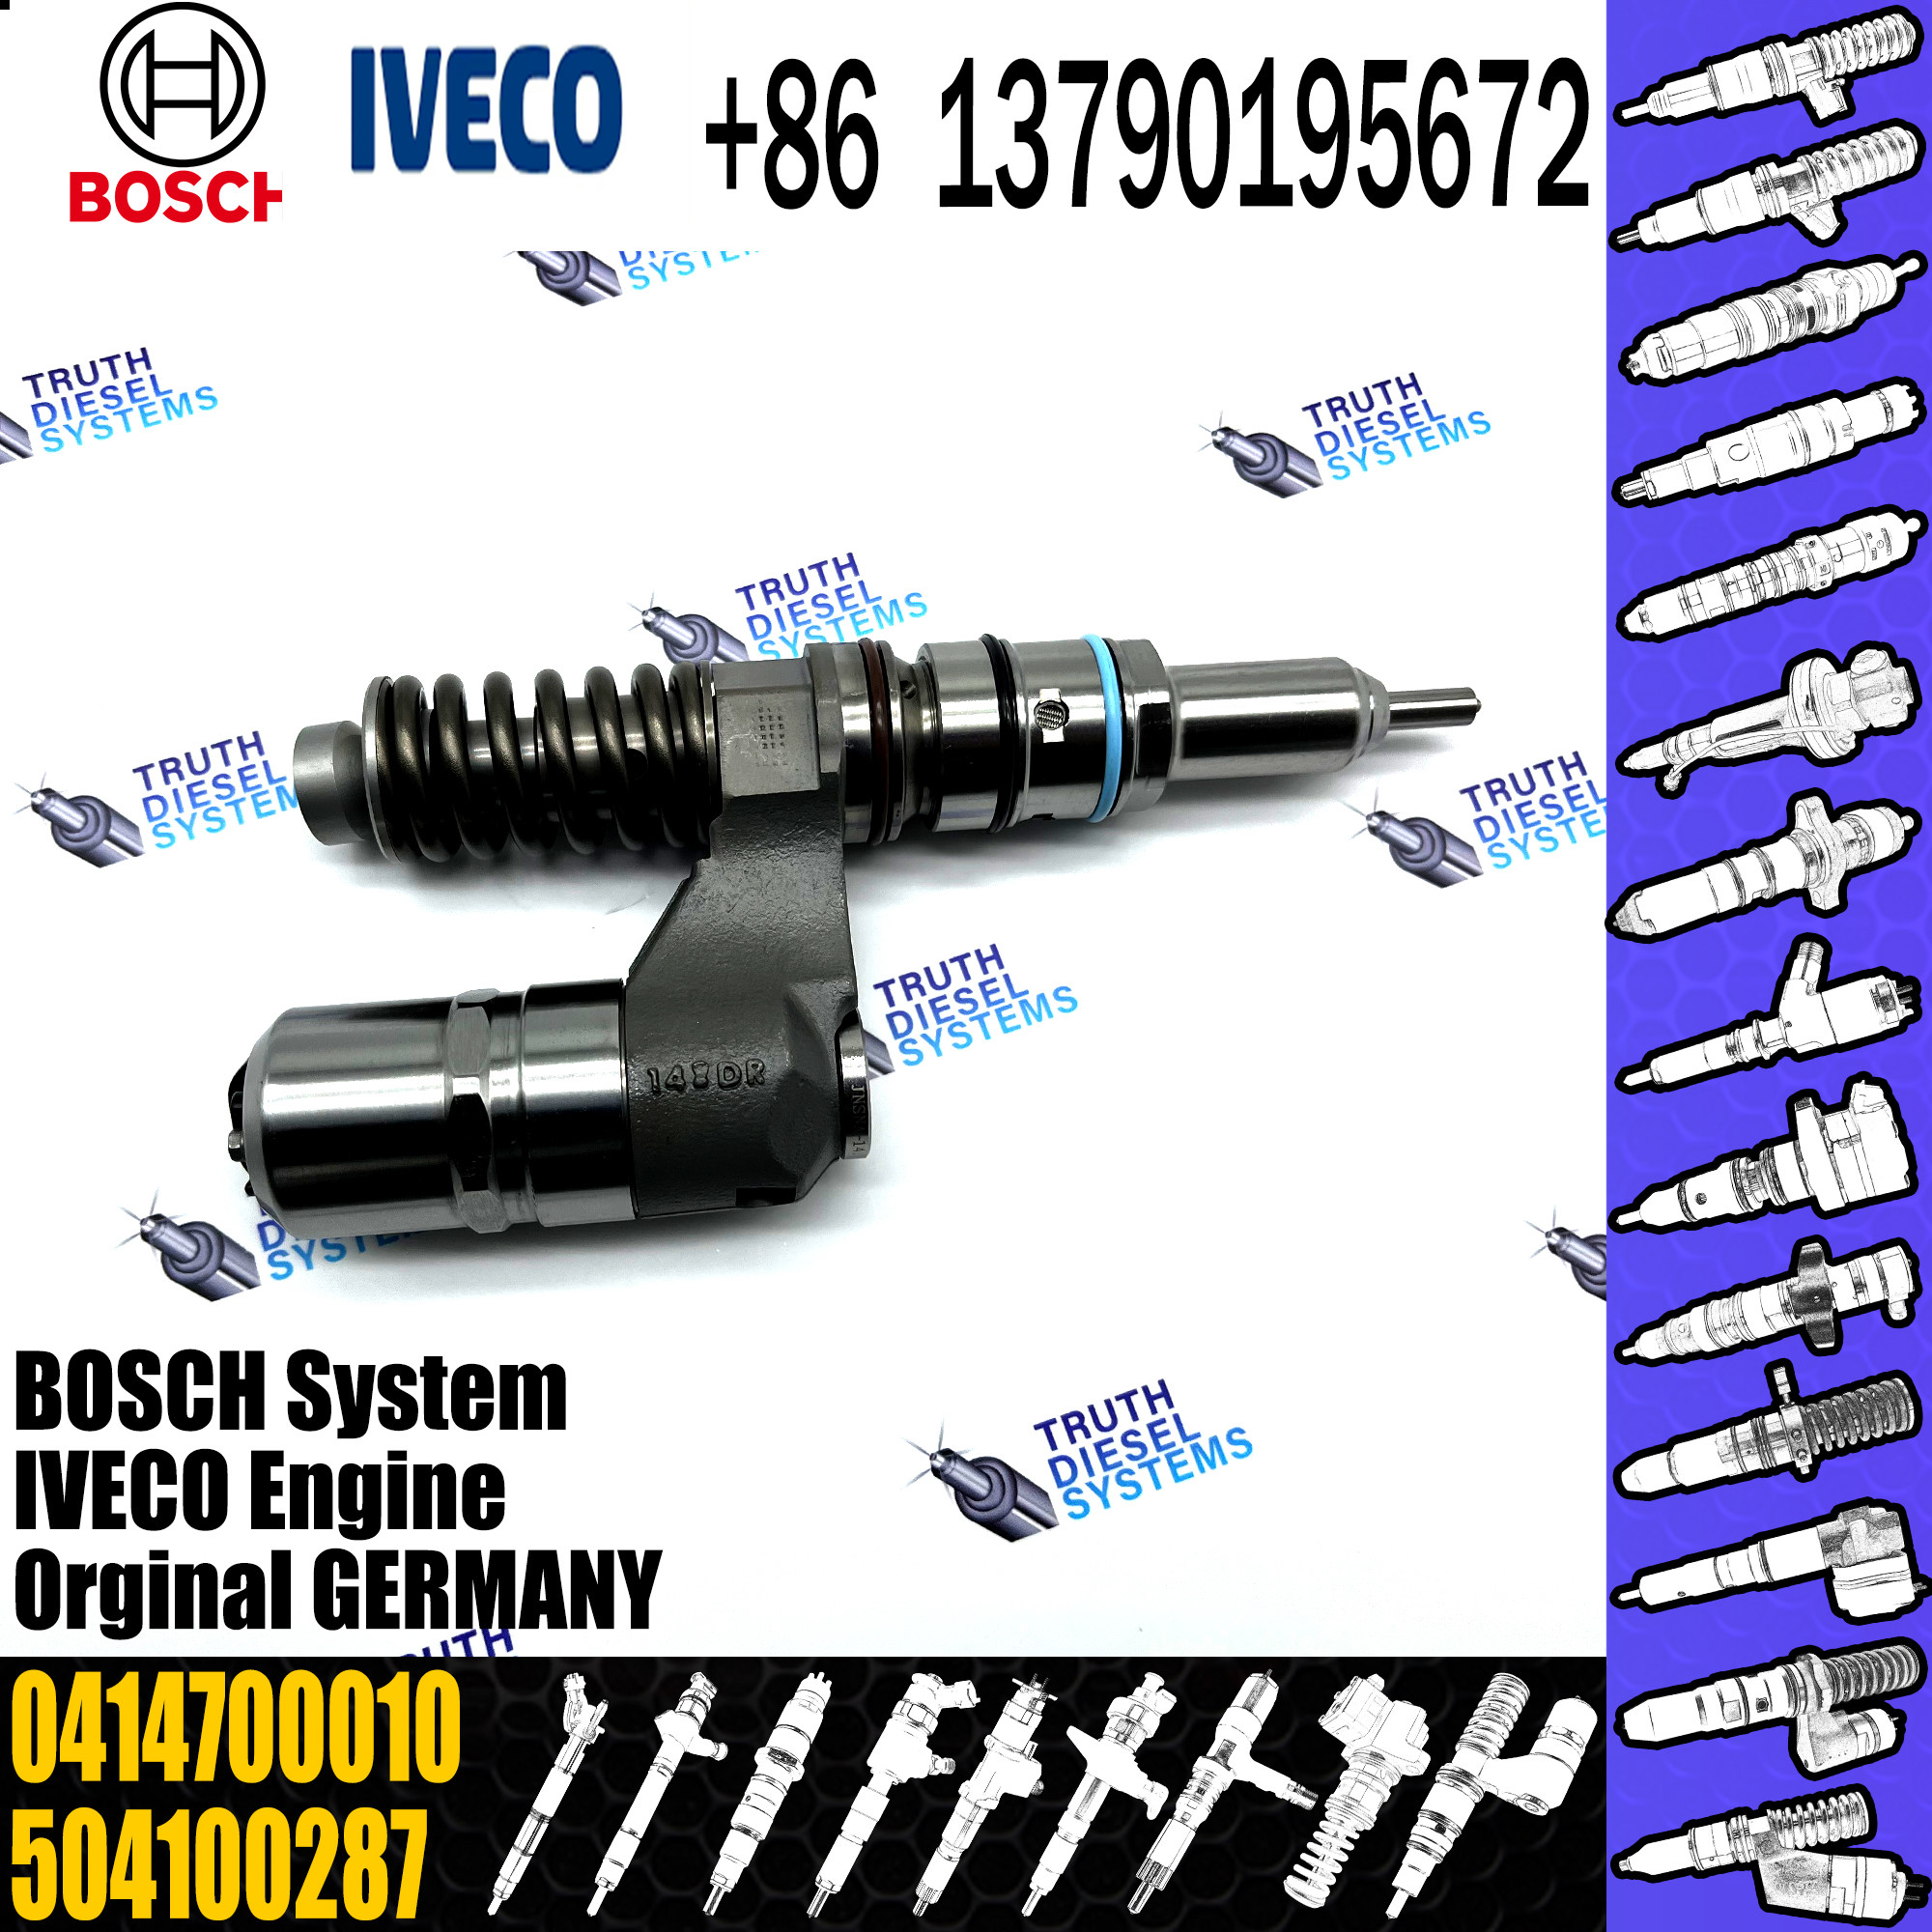 China BOSCH injetor 0414700010 0414700006 Diesel fuel Unit pump assembly 2995486 0986441020 504100287 for IVECO Fiat engine factory